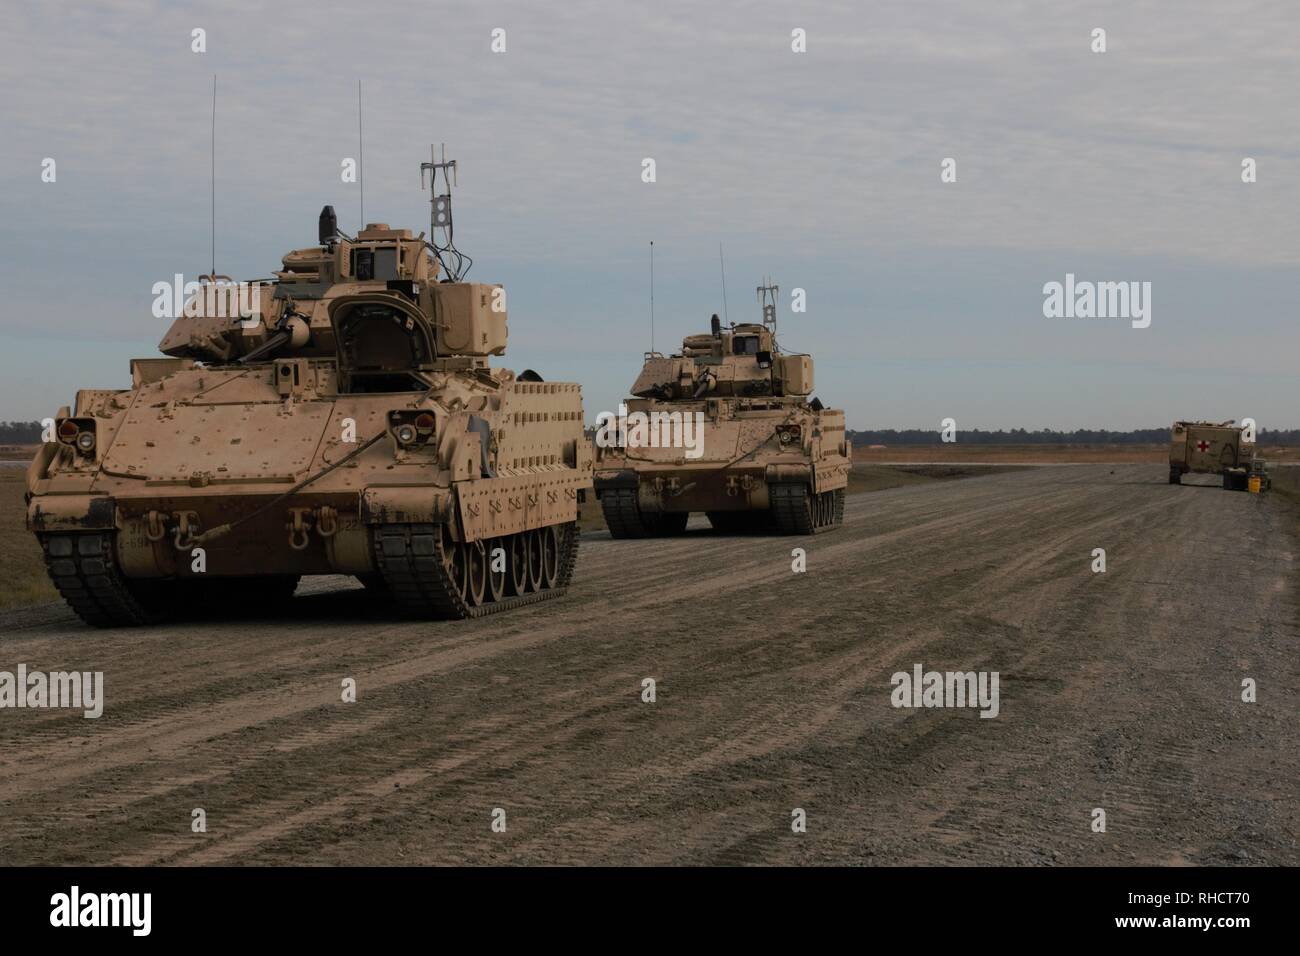 Bradley Fighting Vehicles assigned to 2nd Battalion, 69th Armored Regiment, 2nd Armored Brigade Combat Team, 3rd Infantry Division, are staged in preparation for a live firing exercise at Fort Stewart, Ga., Jan. 31. The 3rd Battalion, 15th Infantry Regiment, 2ABCT, 3ID, provided the Vehicle Crew Evaluation team for 2-69, with crews from 3-15 joining them on Feb. 1. (U.S. Army Photo by Spc. Jordyn Worshek, Released) Stock Photo